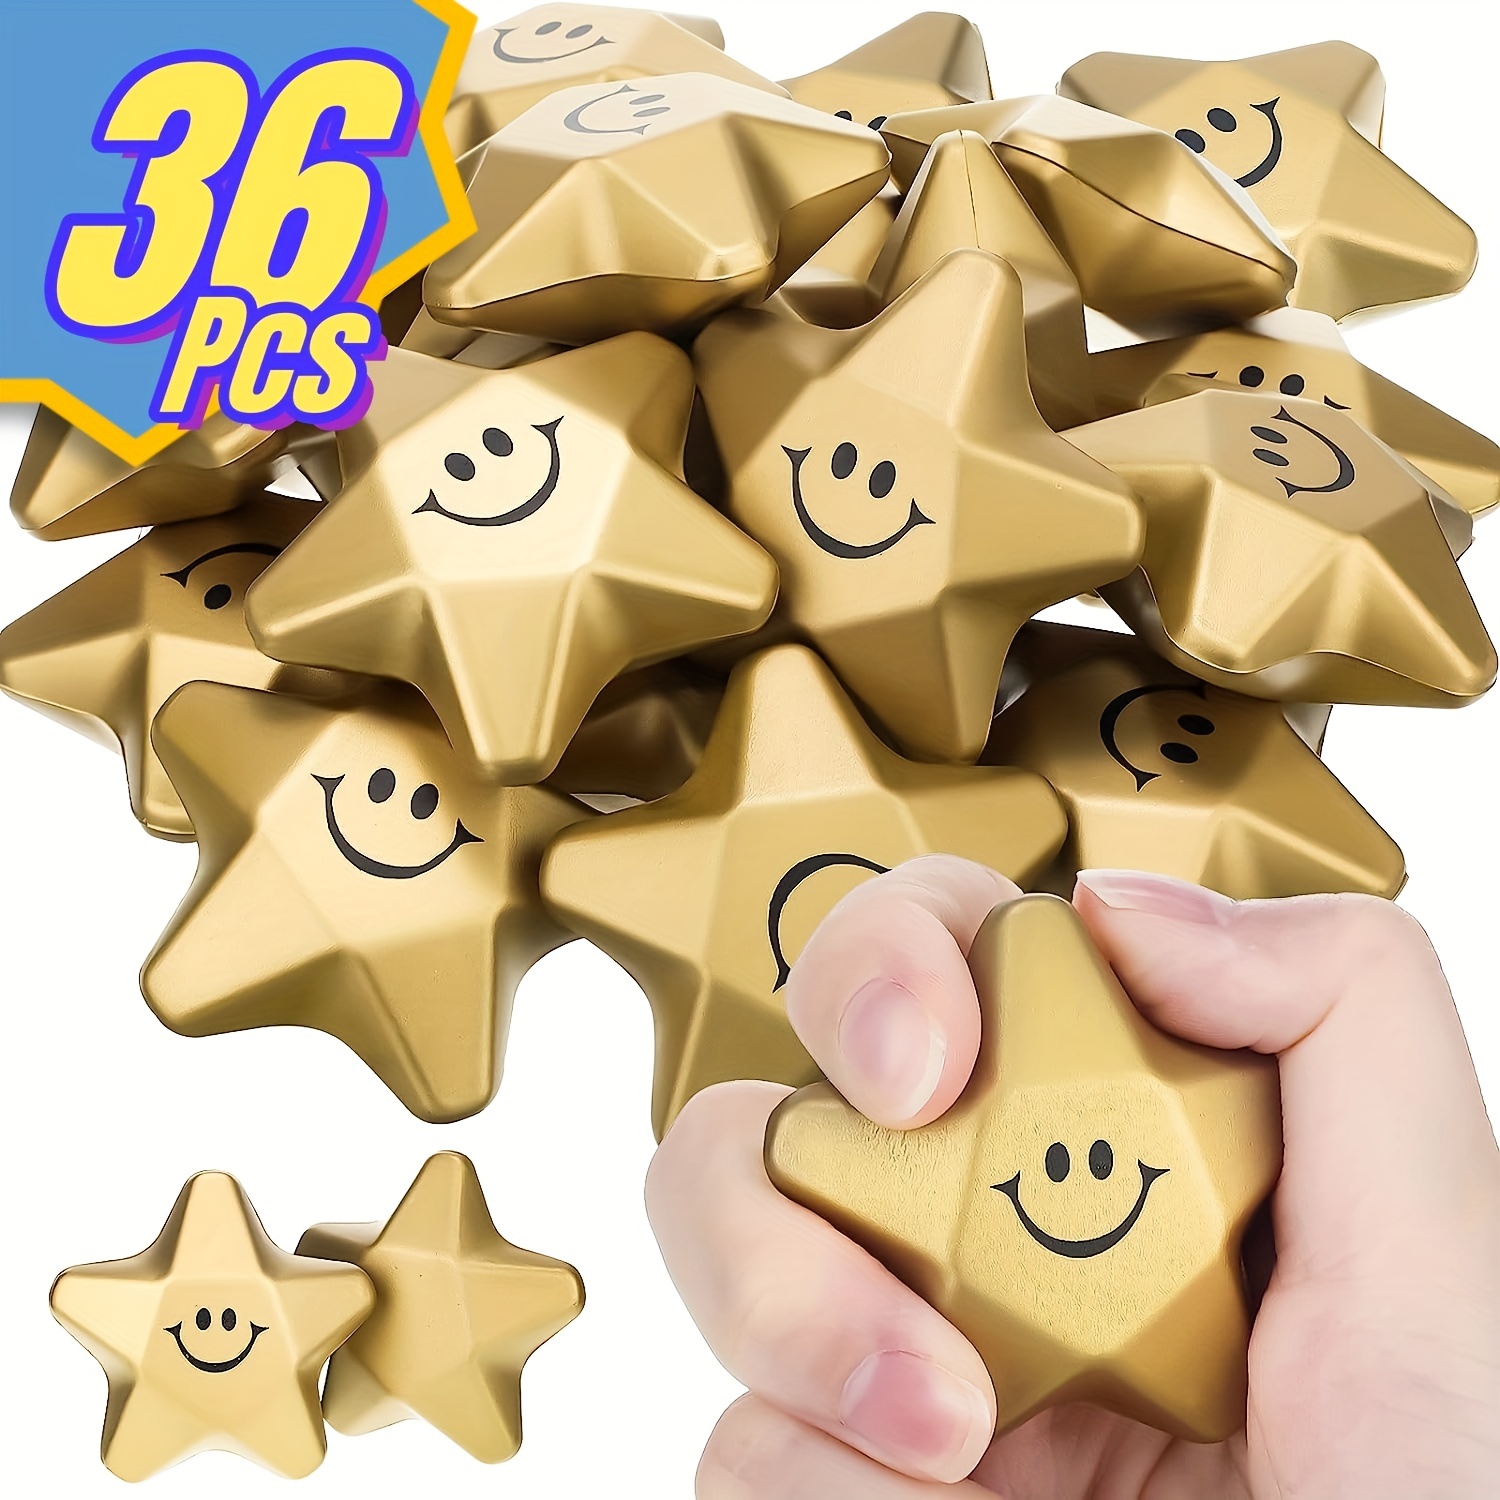  1620Pcs 0.6inch Gold Foil Star Stickers Labels for